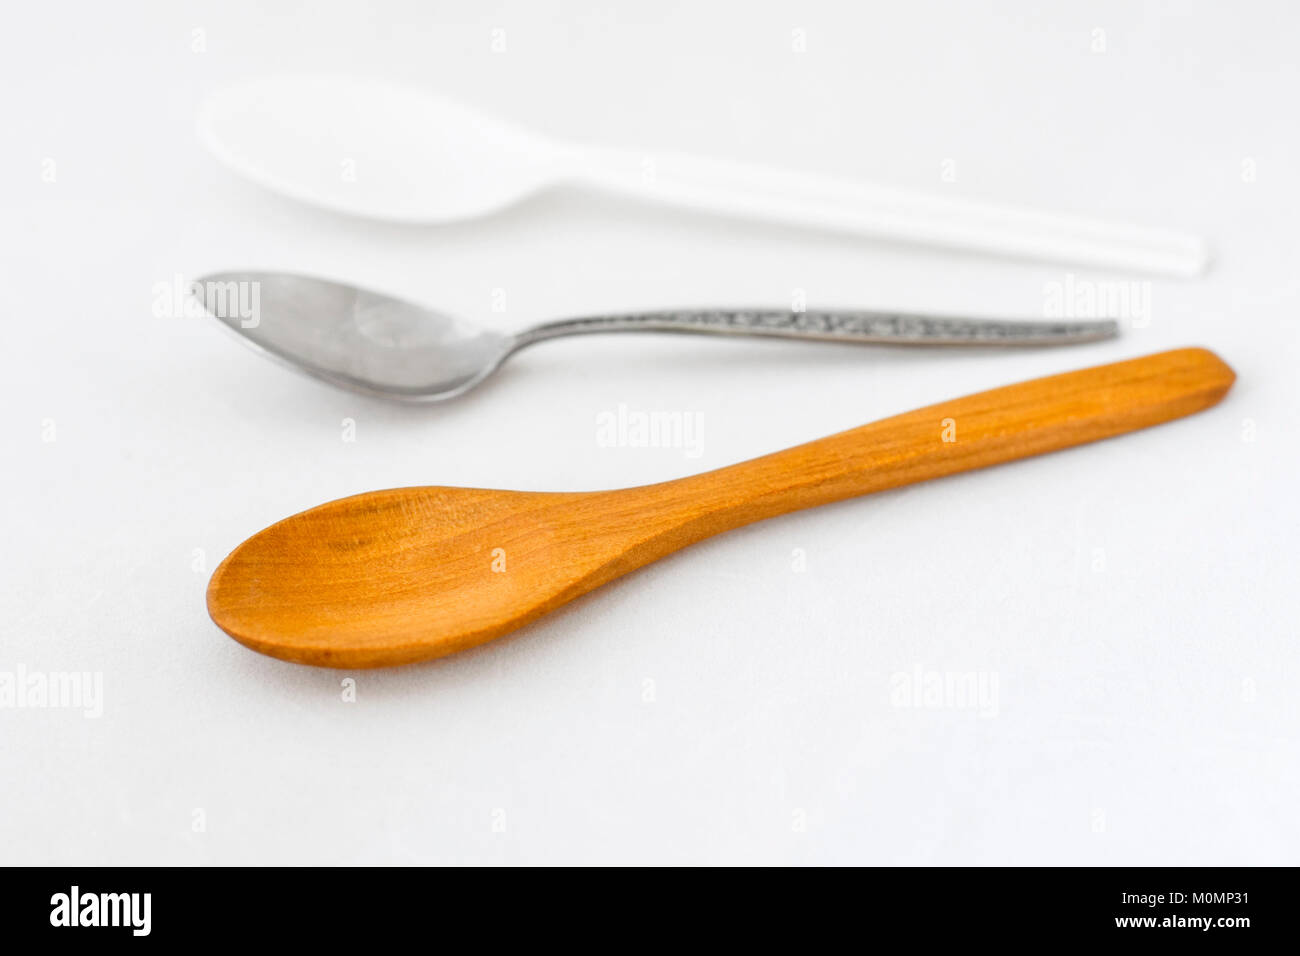 Why use a wooden spoon instead of a metal spoon Wooden Spoon Plastic Spoon And Metal Spoon Stock Photo Alamy